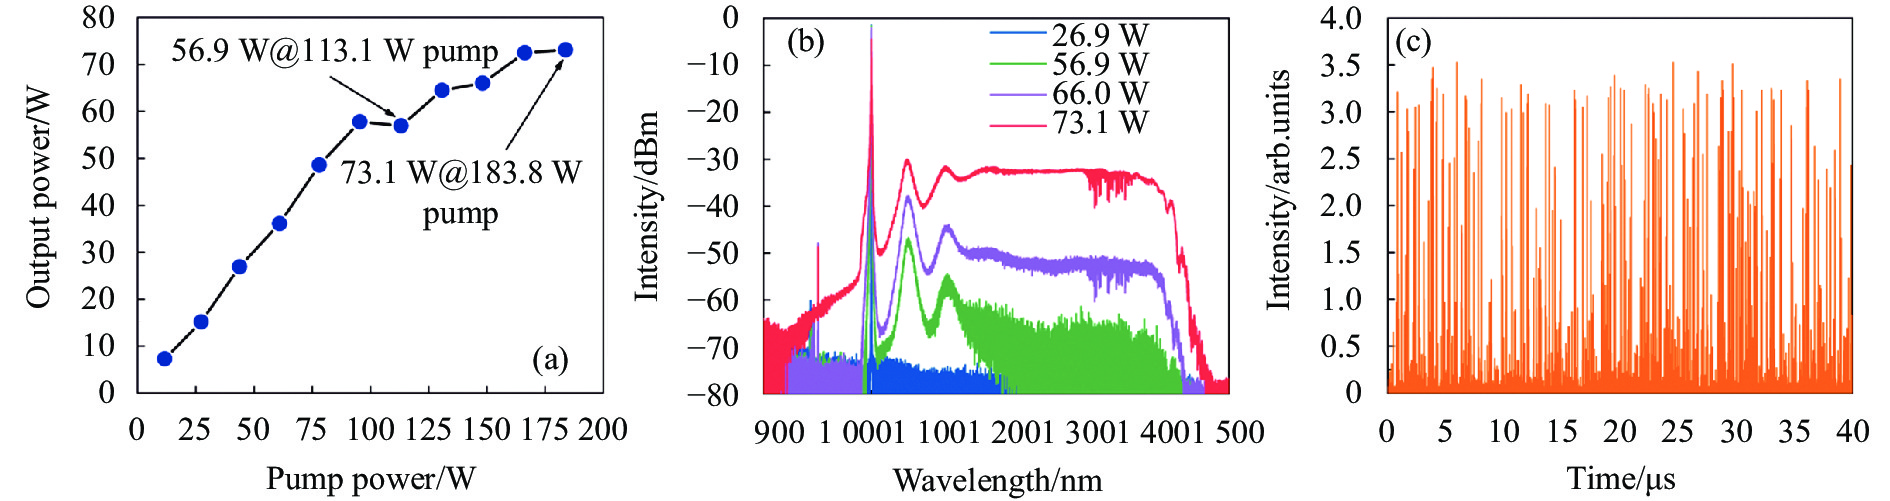 Properties of near-infrared supercontinuum. (a) Power property; (b) Spectral evolution corresponding to the output laser power; (c) Time-domain characteristics at the maximum output power